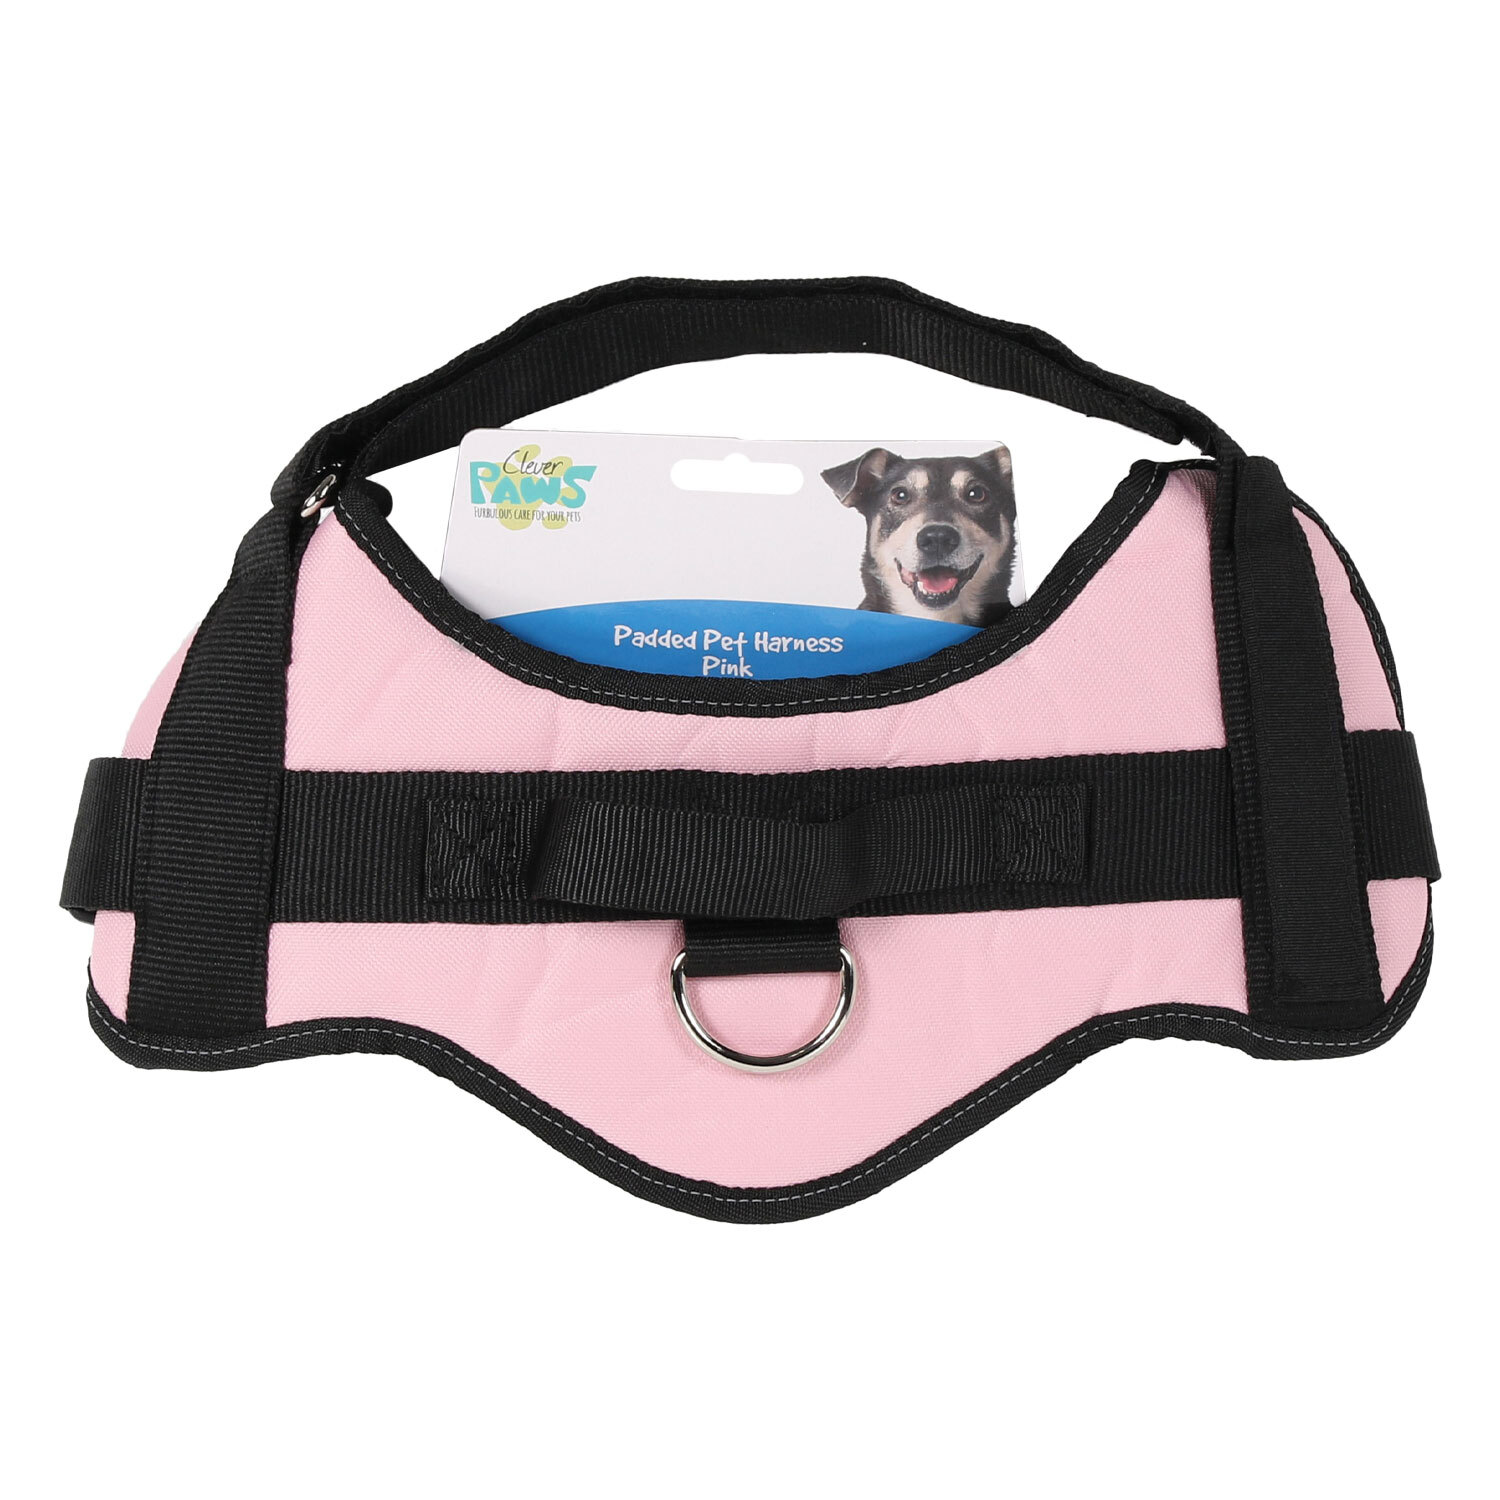 Clever Paws Medium Pink Padded Dog Harness Image